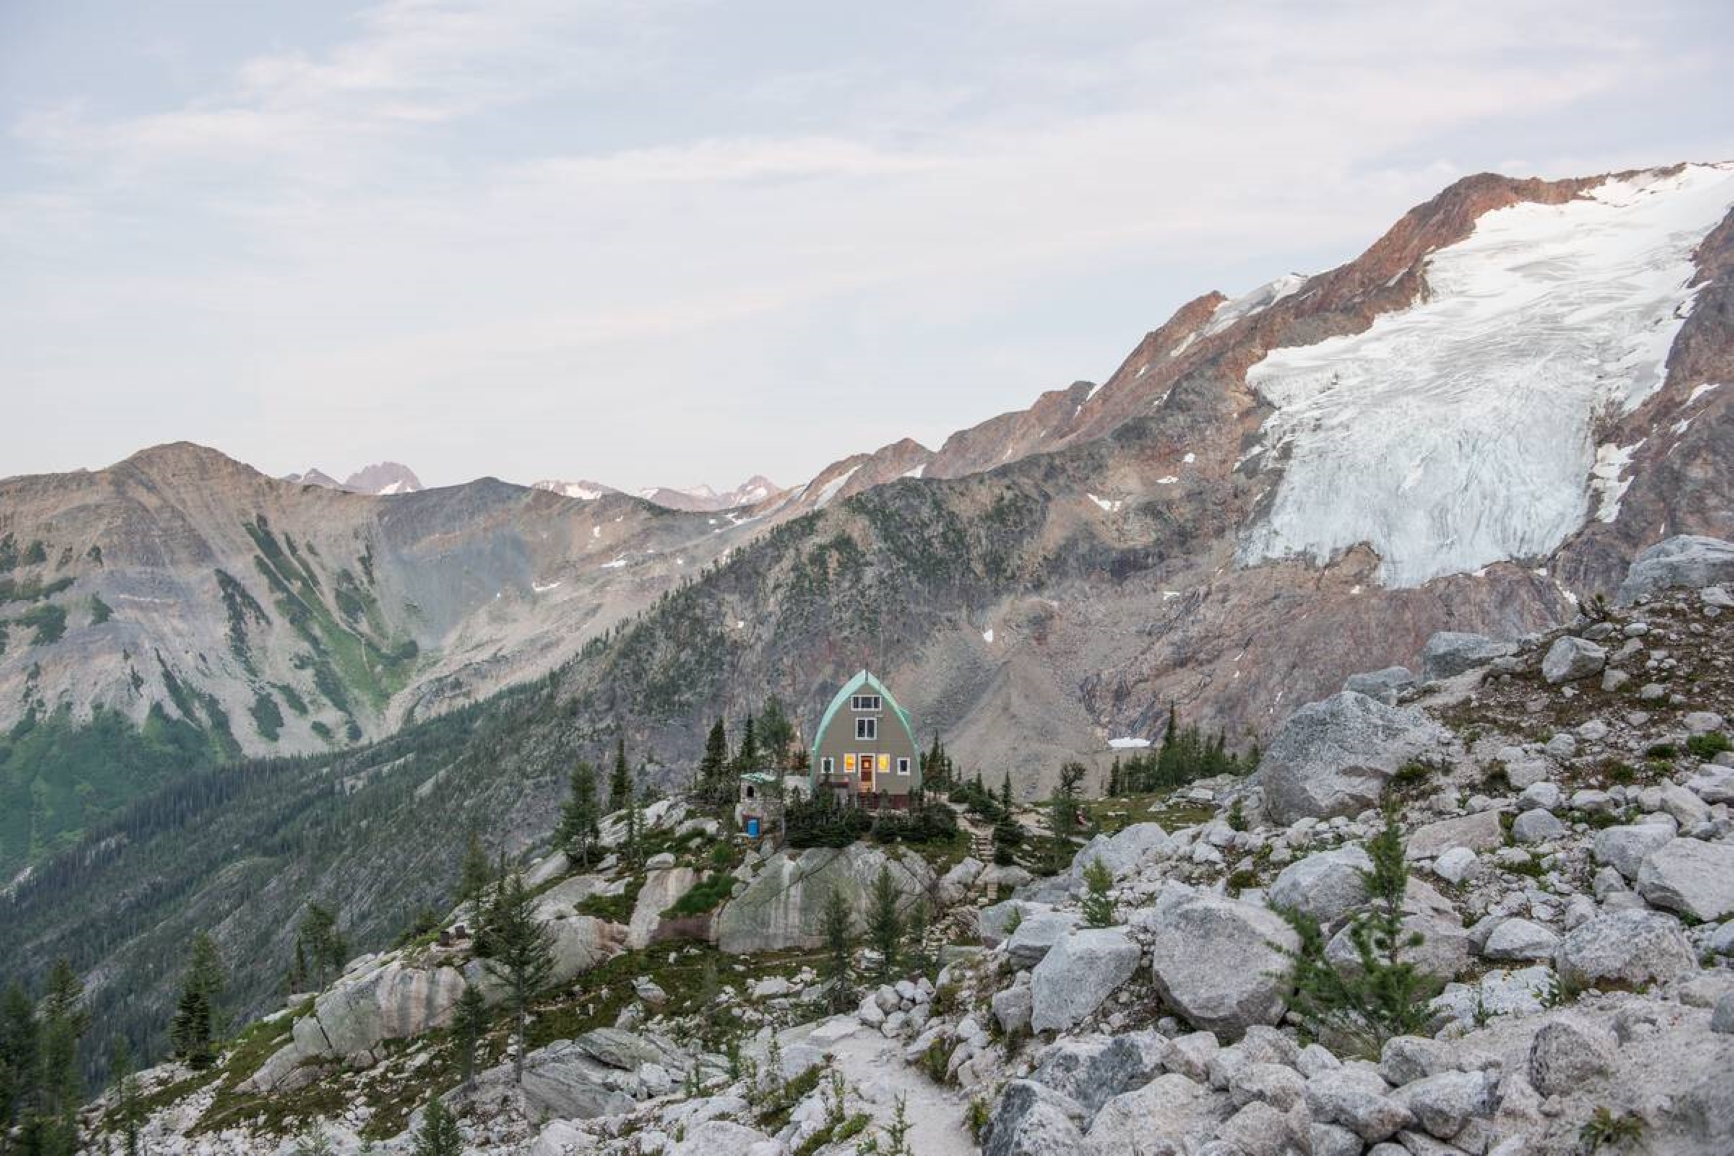 View of cabin perched in between snowcapped mountains and rocky landscape. Photo credit: Destination BC